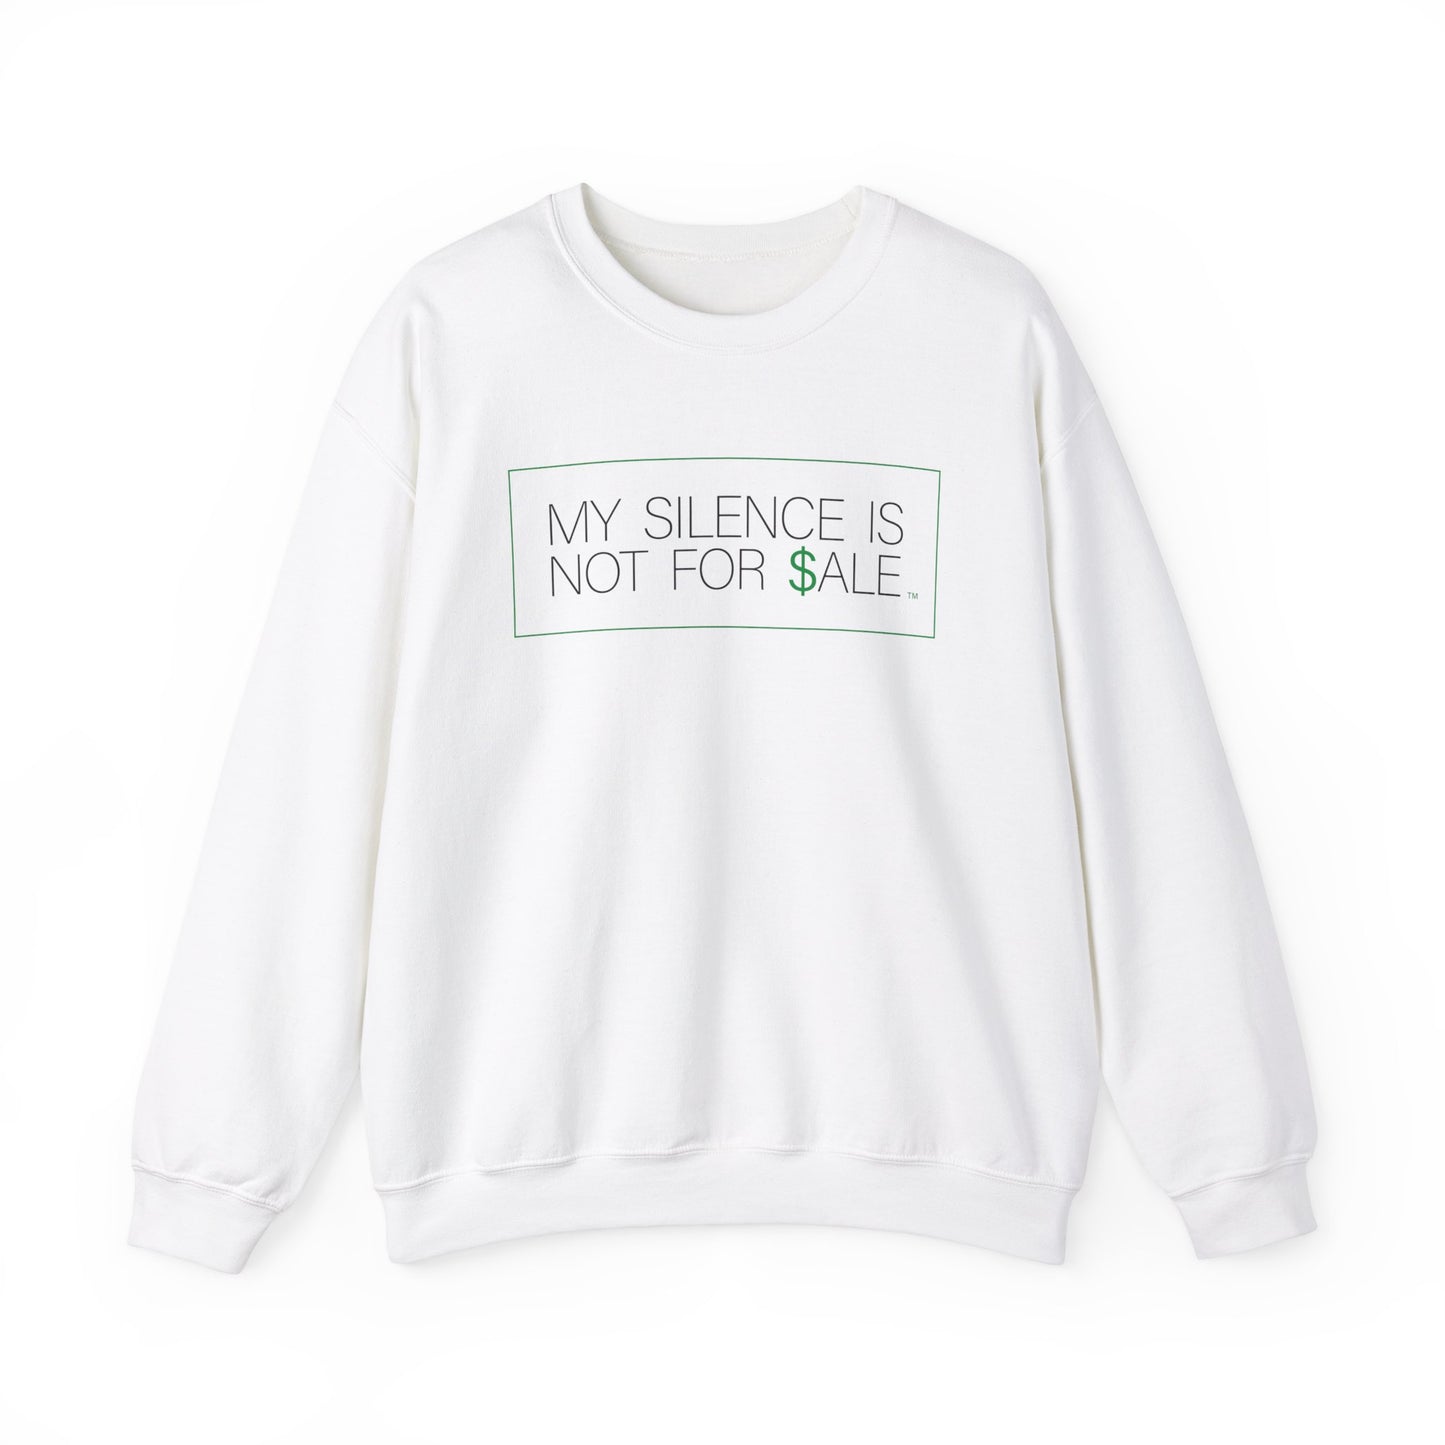 MY SILENCE IS NOT FOR $ALE Unisex Heavy Blend™ Crewneck Sweatshirt